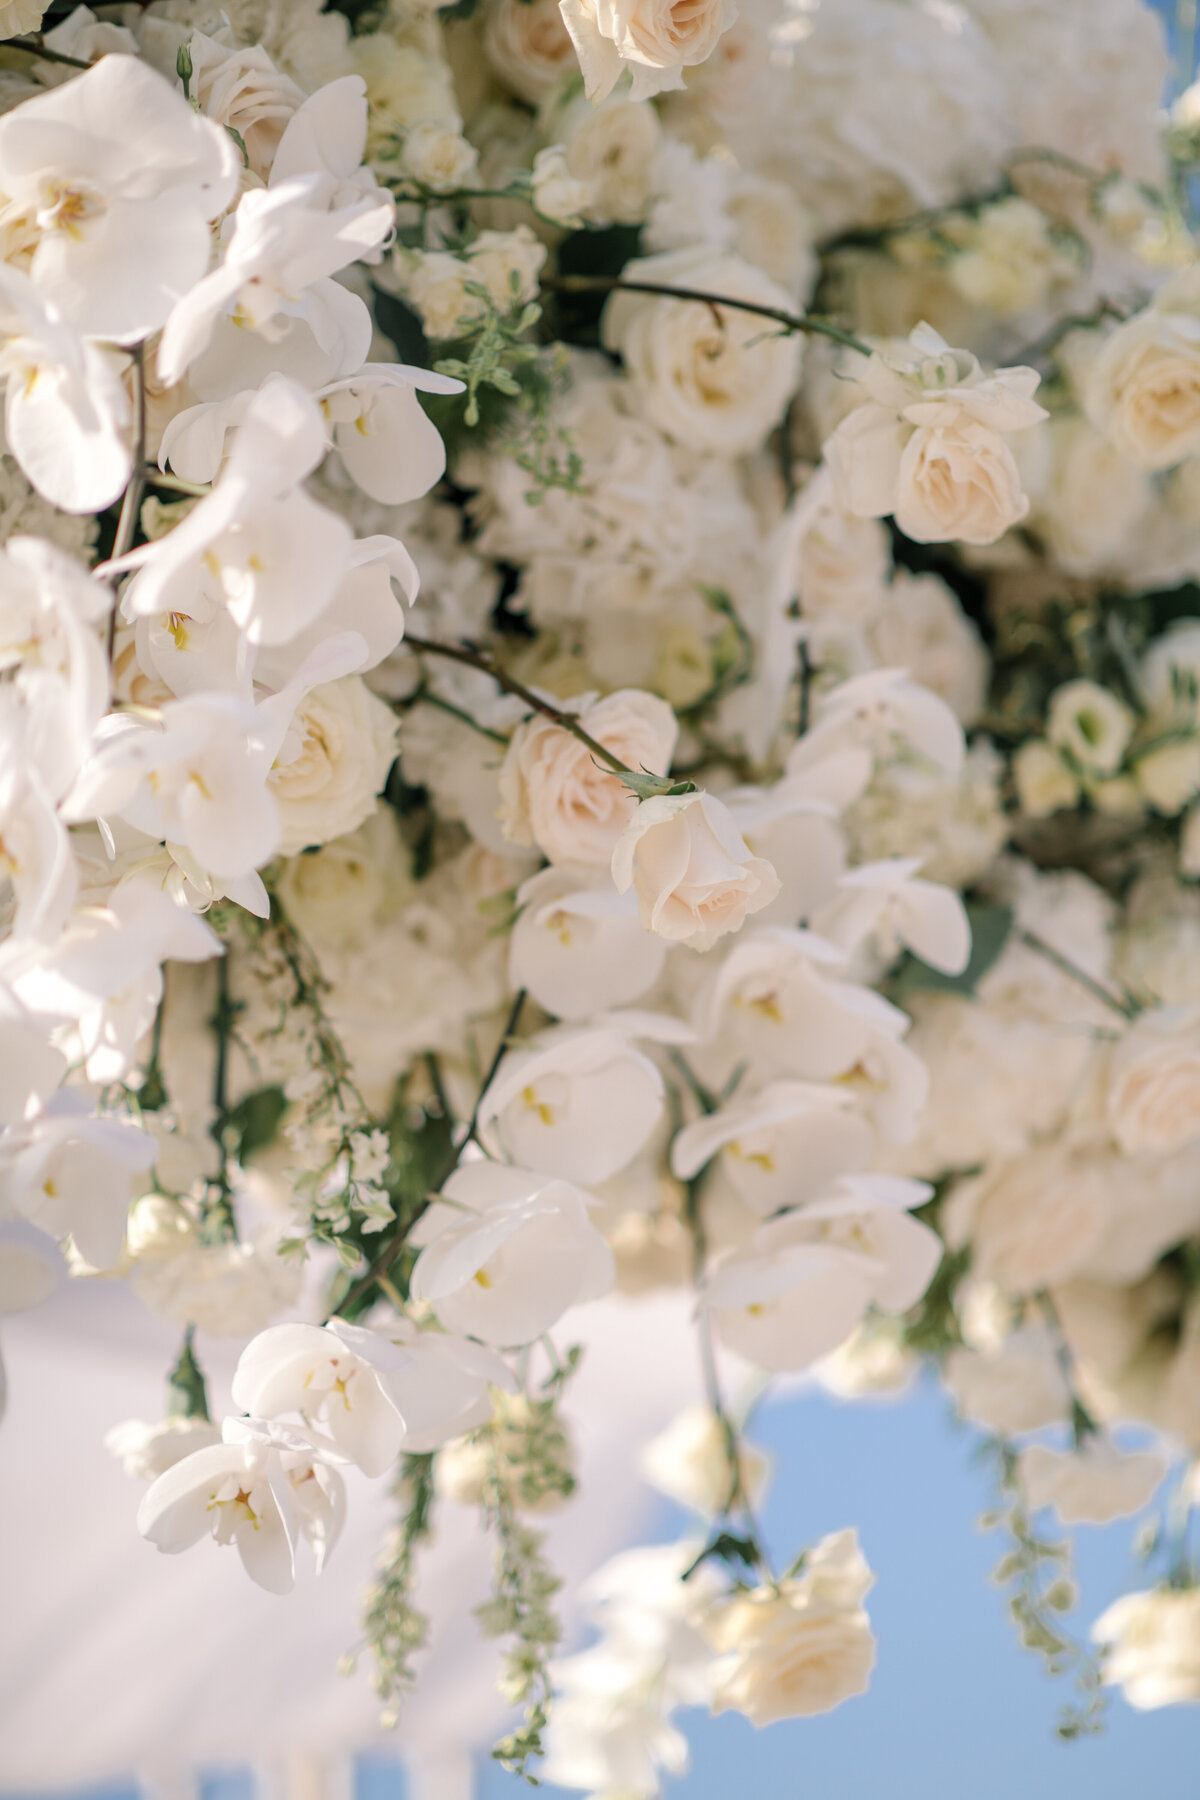 chuppah flower details with white orchids at jewish wedding in mallorca